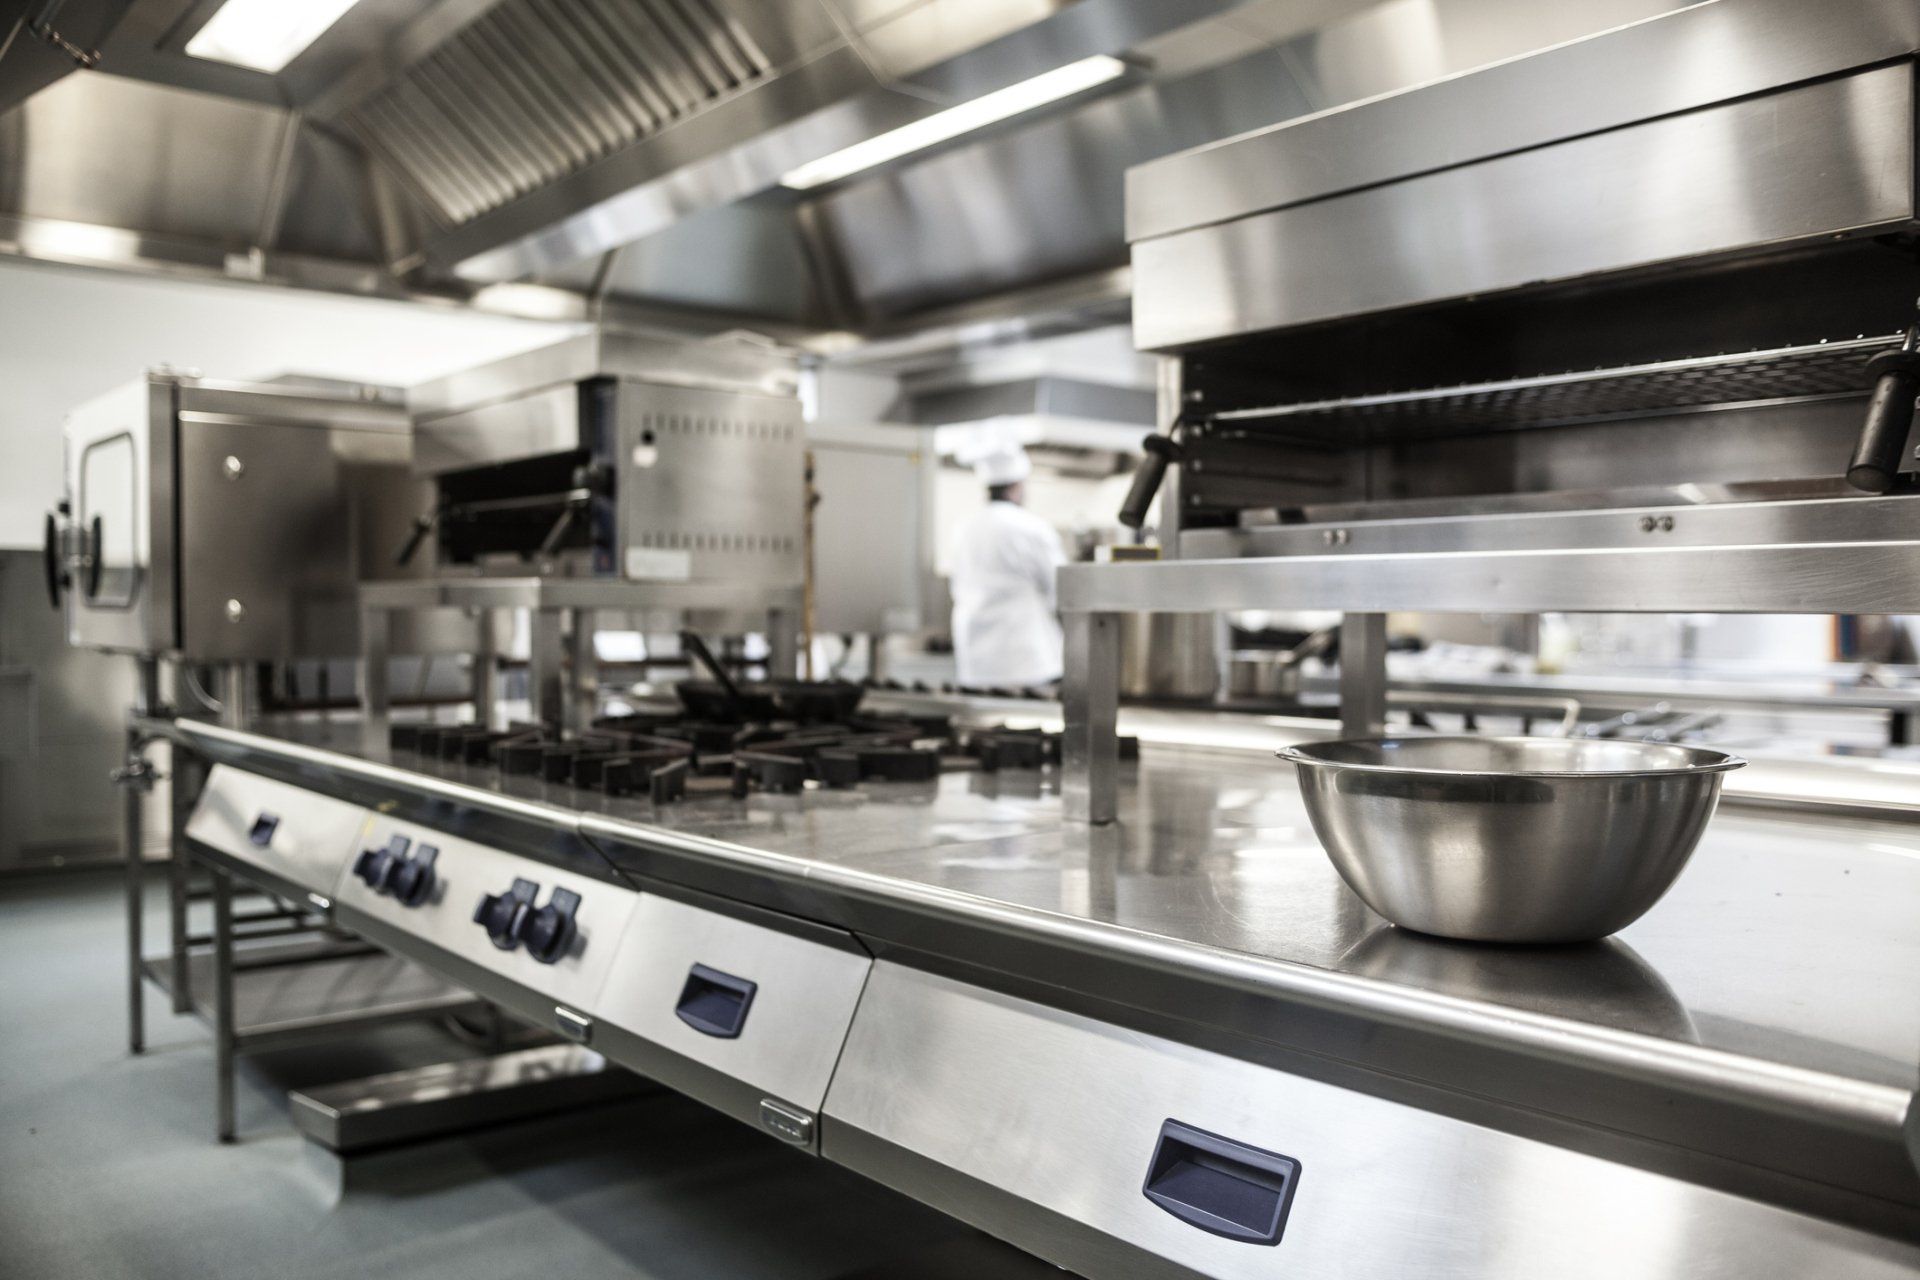 Work Surface And Kitchen Equipment In Professional Kitchen - Fuquay Varina, NC - RC Commercial Equipment Repair Services Inc.